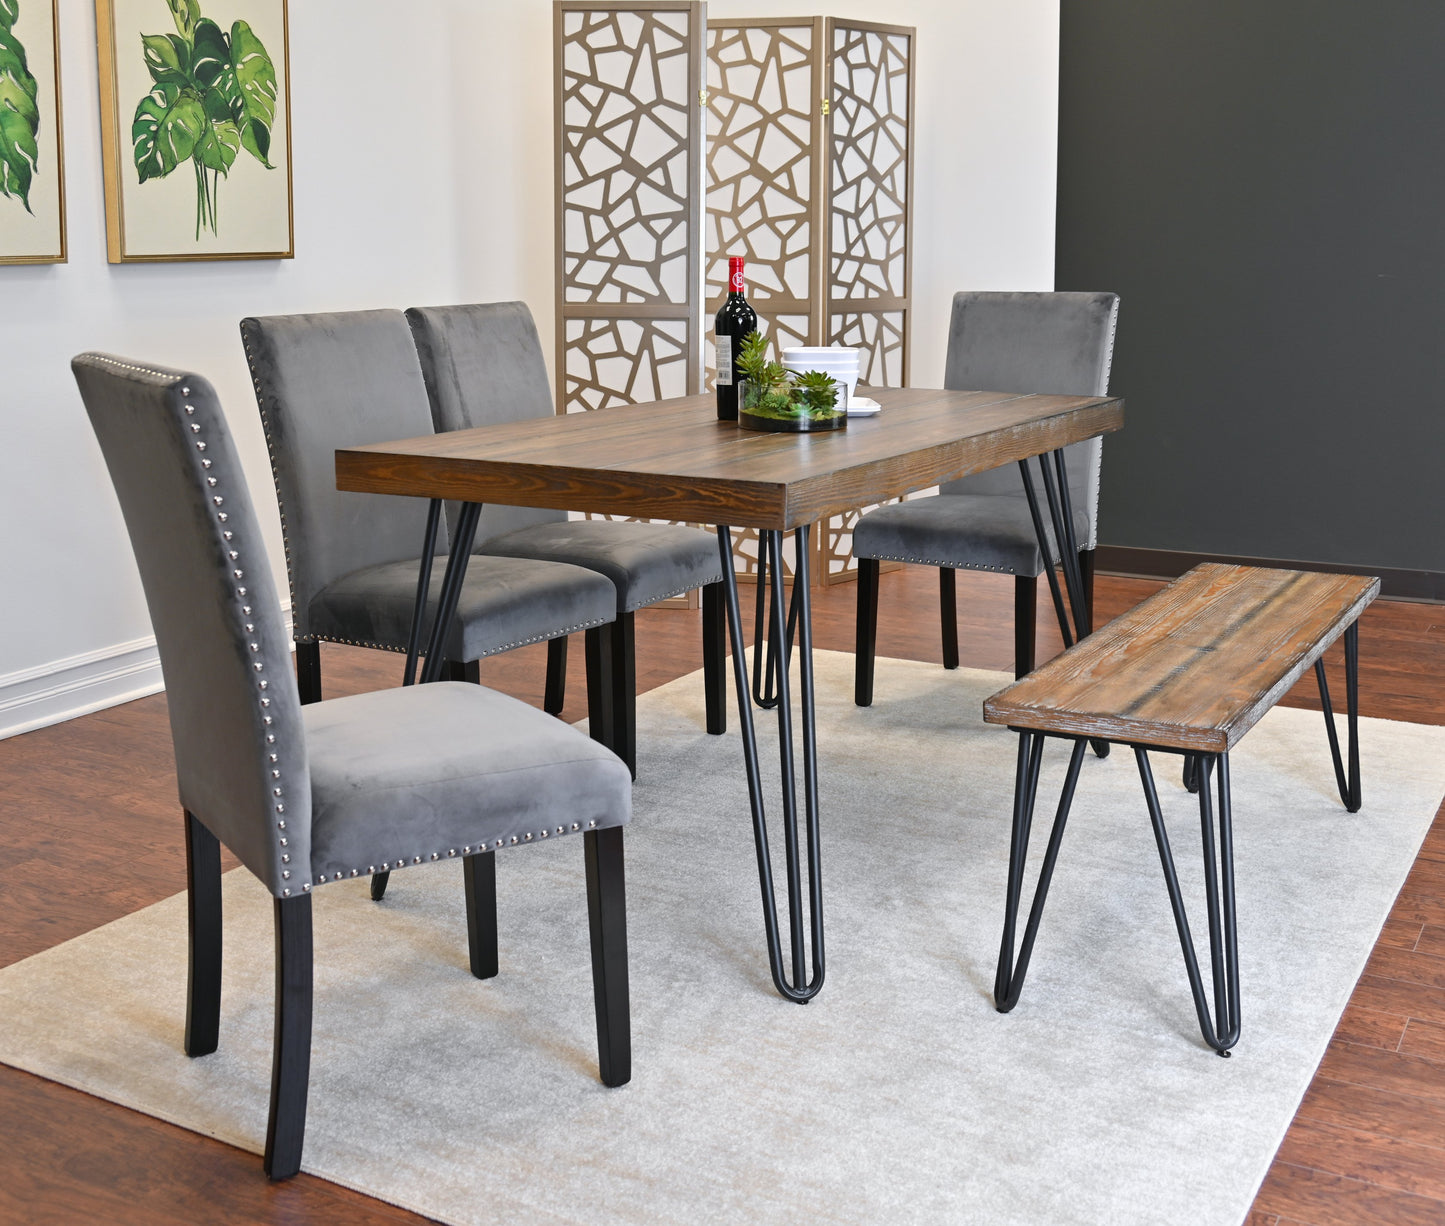 Ashzo 6-Piece Dining Set, Hairpin Dining Table with 4 Chairs and Bench, 3 Color Options